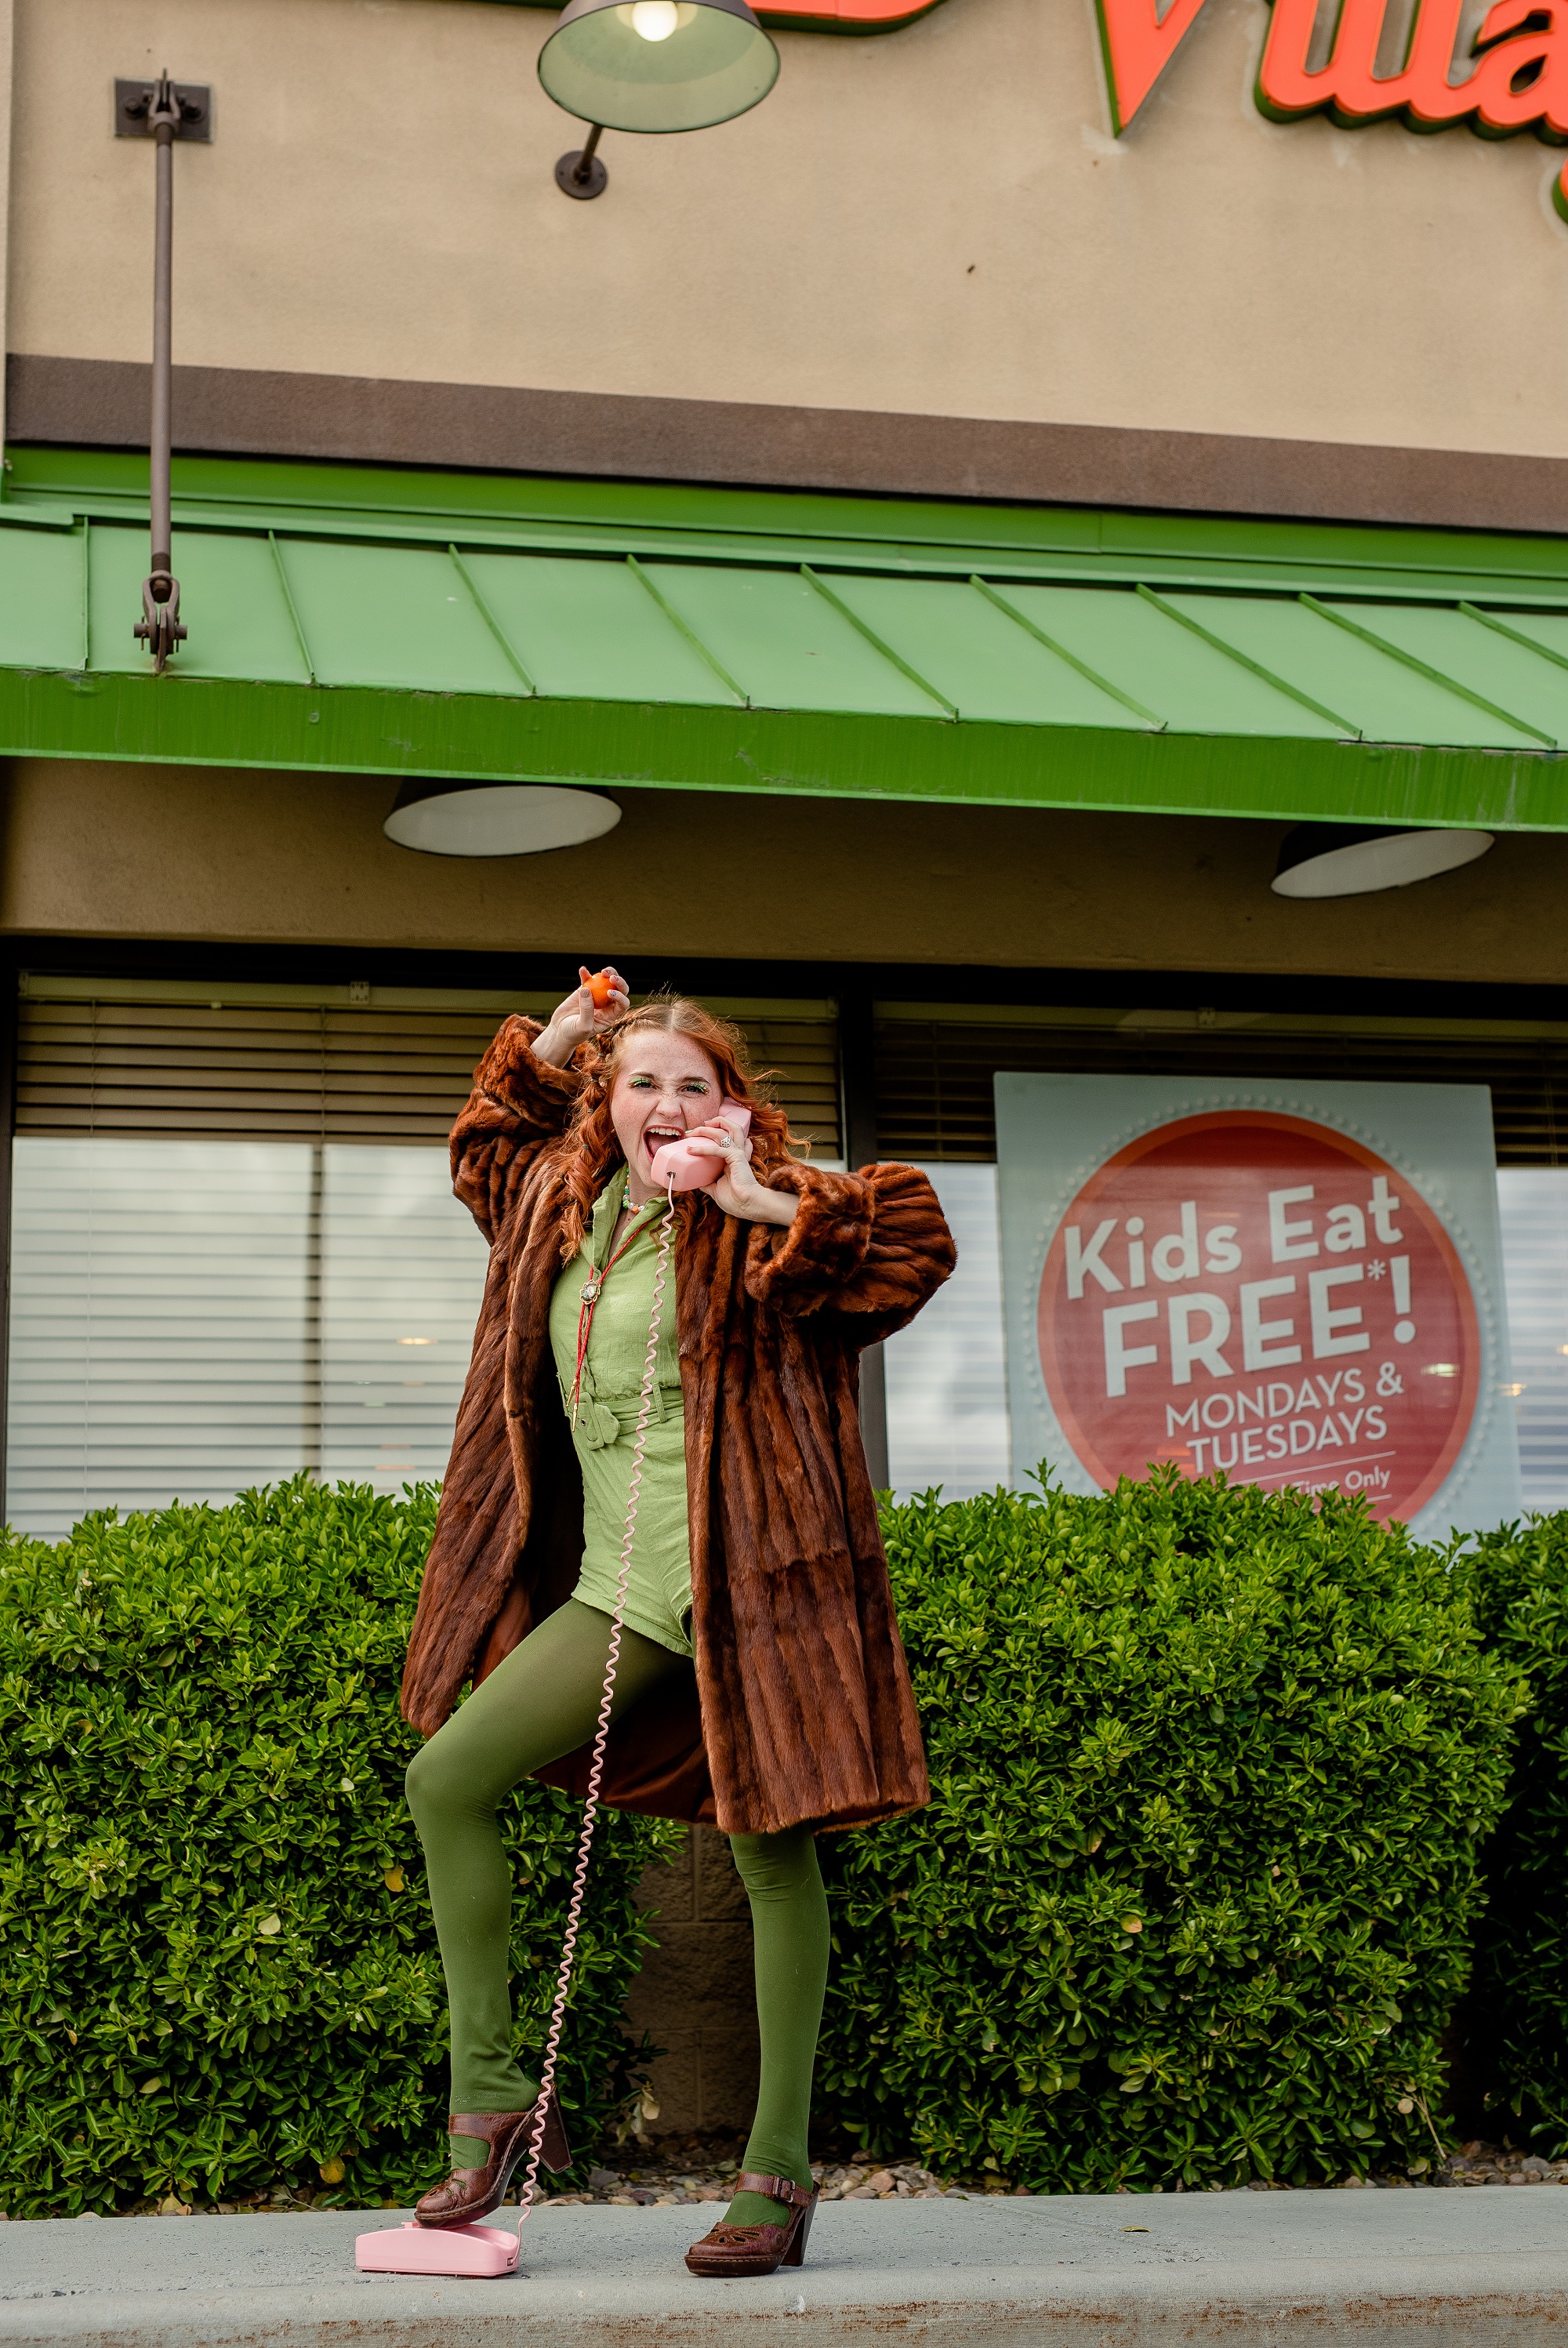 Village Inn- Vintage Vibe with Cantaloupe  Photoshoot by Lucy L Photography LLC